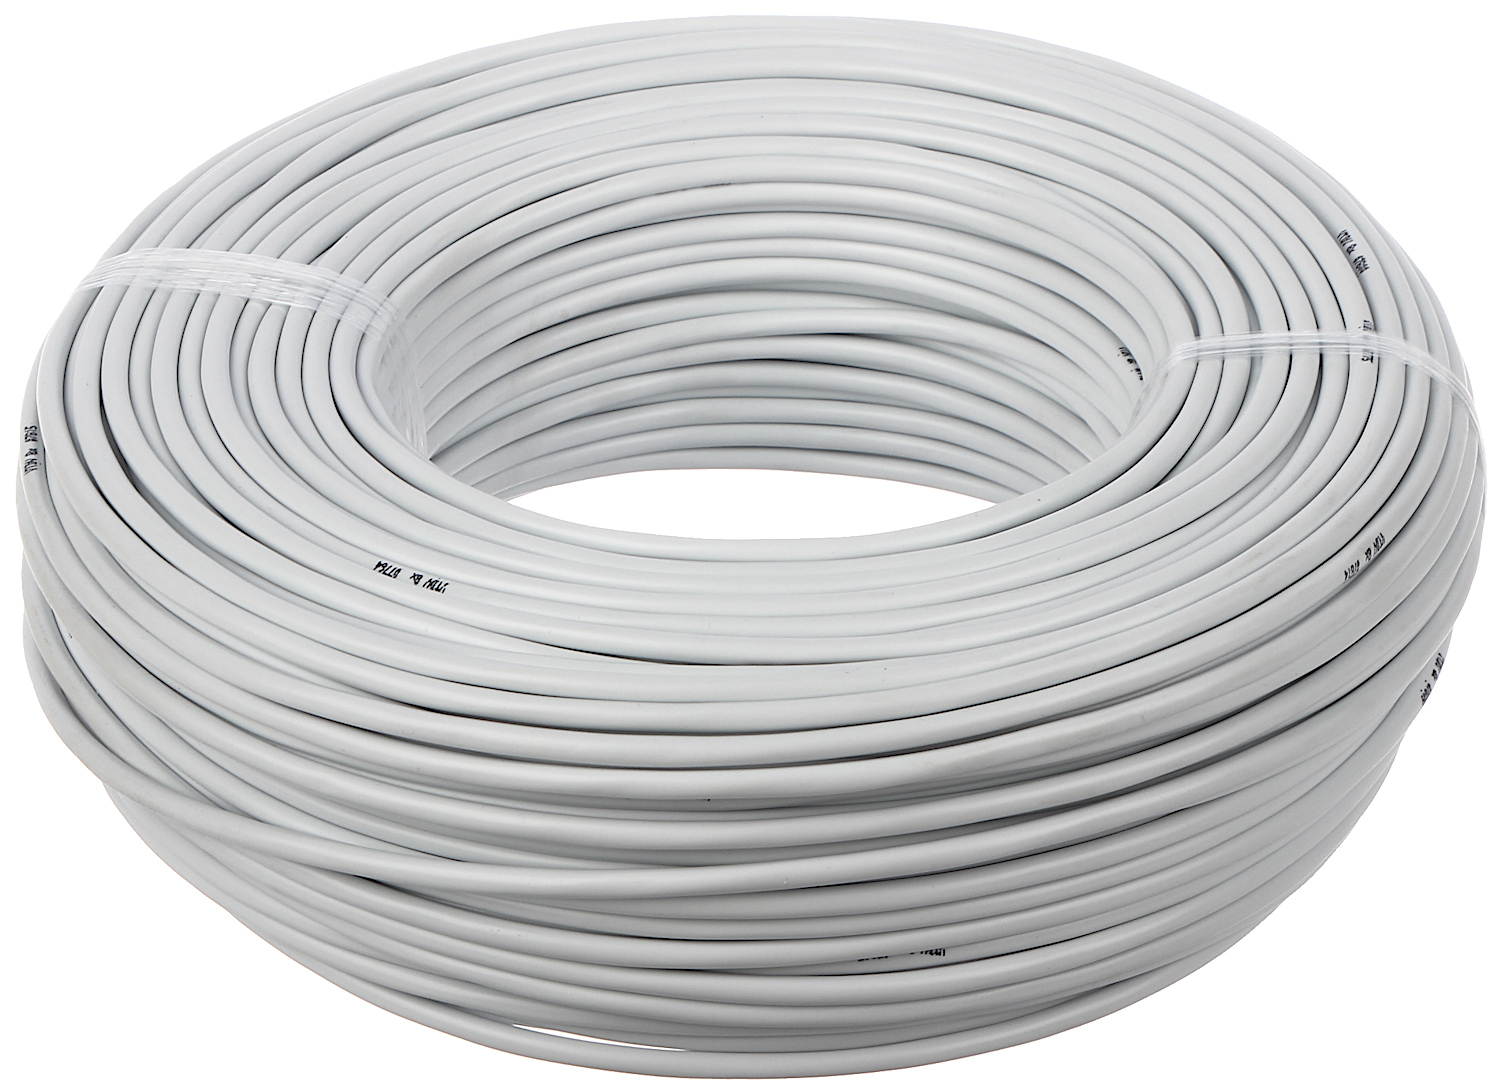 CABLE YTDY-8X0.5 - Alarm Cables - Delta